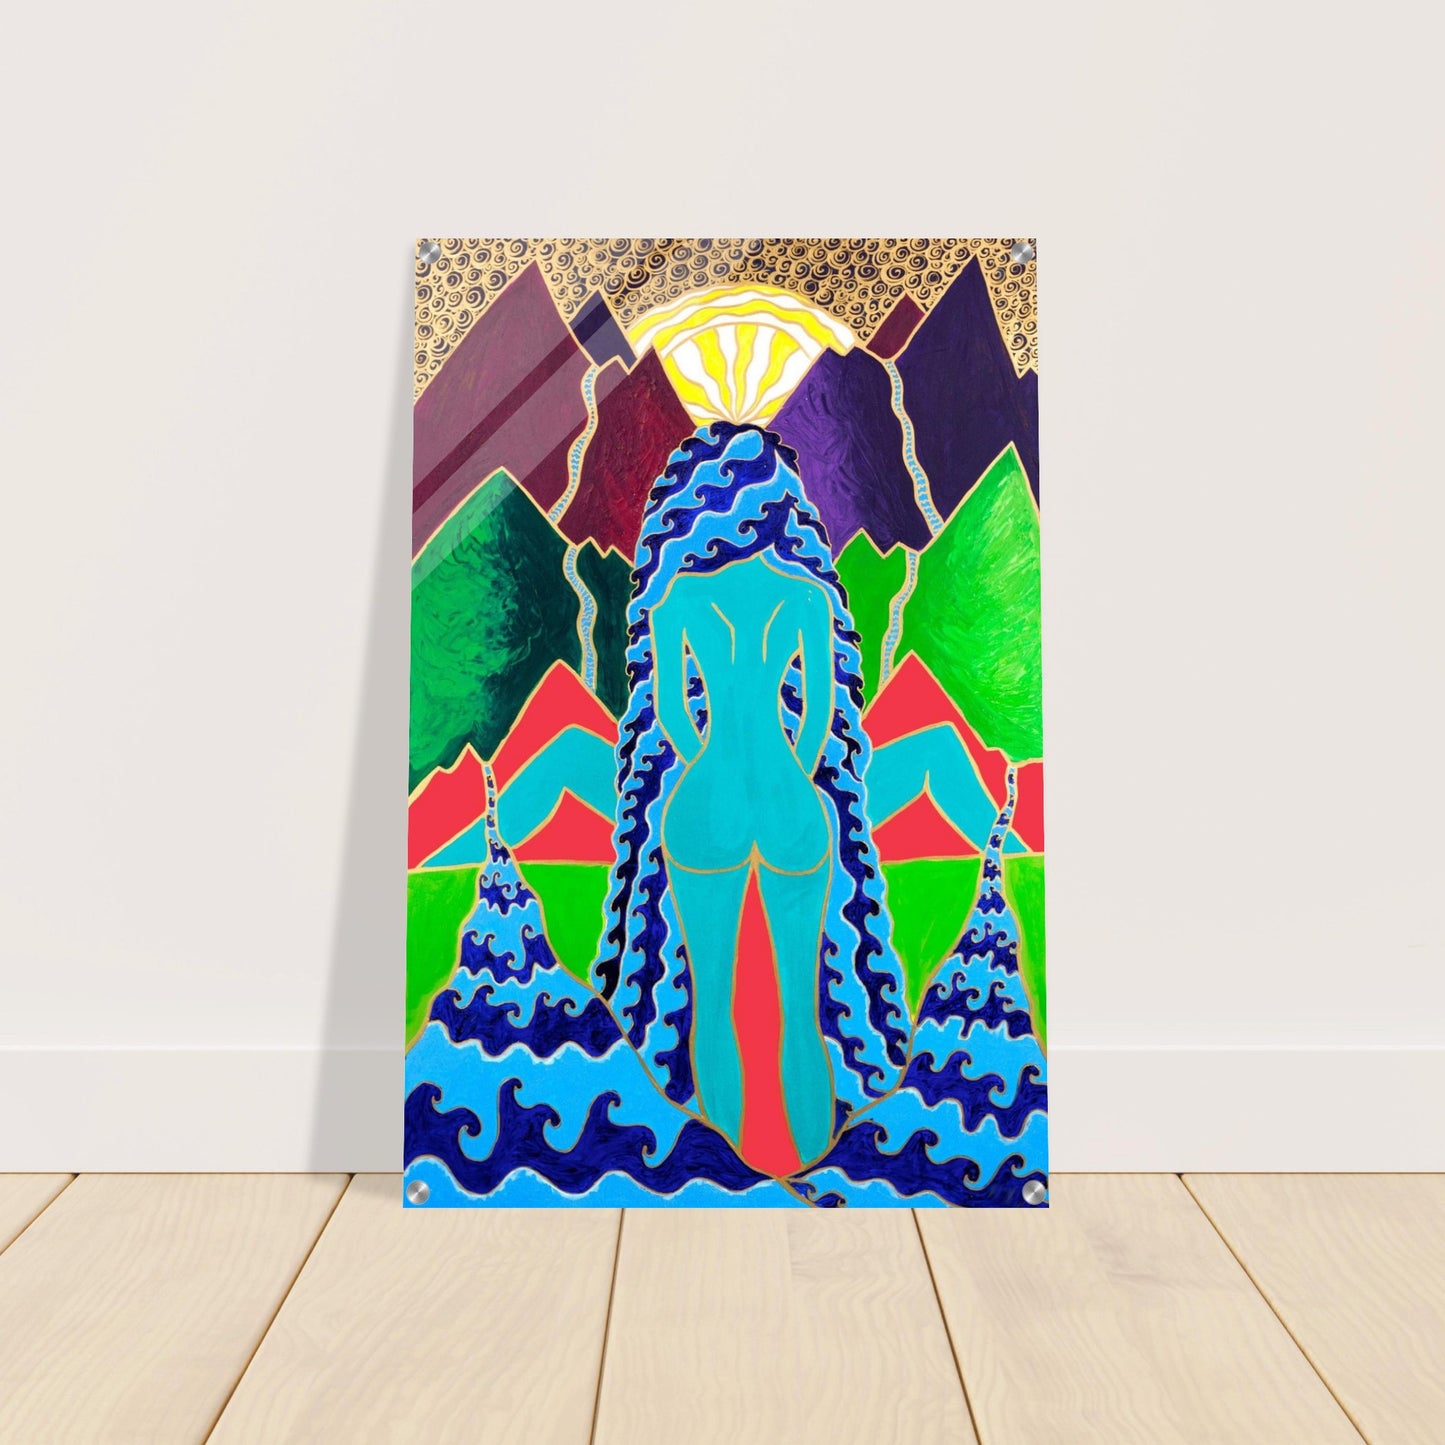 The Goddess of Choice, Acrylic Print size 24" by 36"